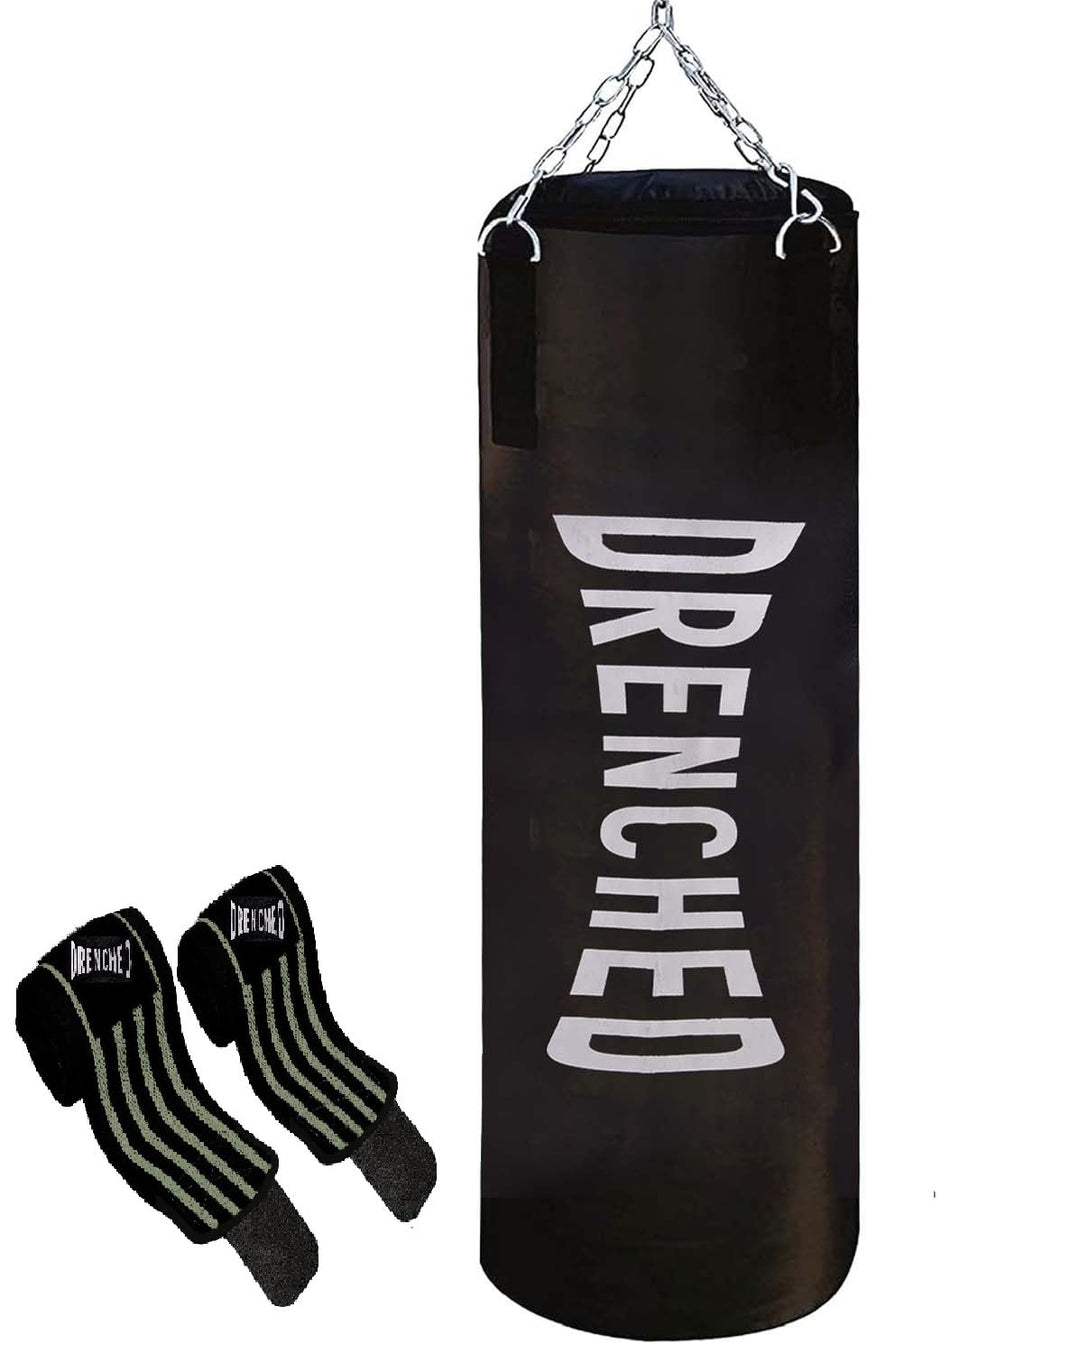 DRENCHED Unfilled Punching Bag with Hanging Chain & Wrist Wrap Combo | Boxing Bag Kit for MMA, Karate, Judo, Muay Thai, Kickboxing,Training at Home or Gym-Black (3 Feet, Wrist Wrap)